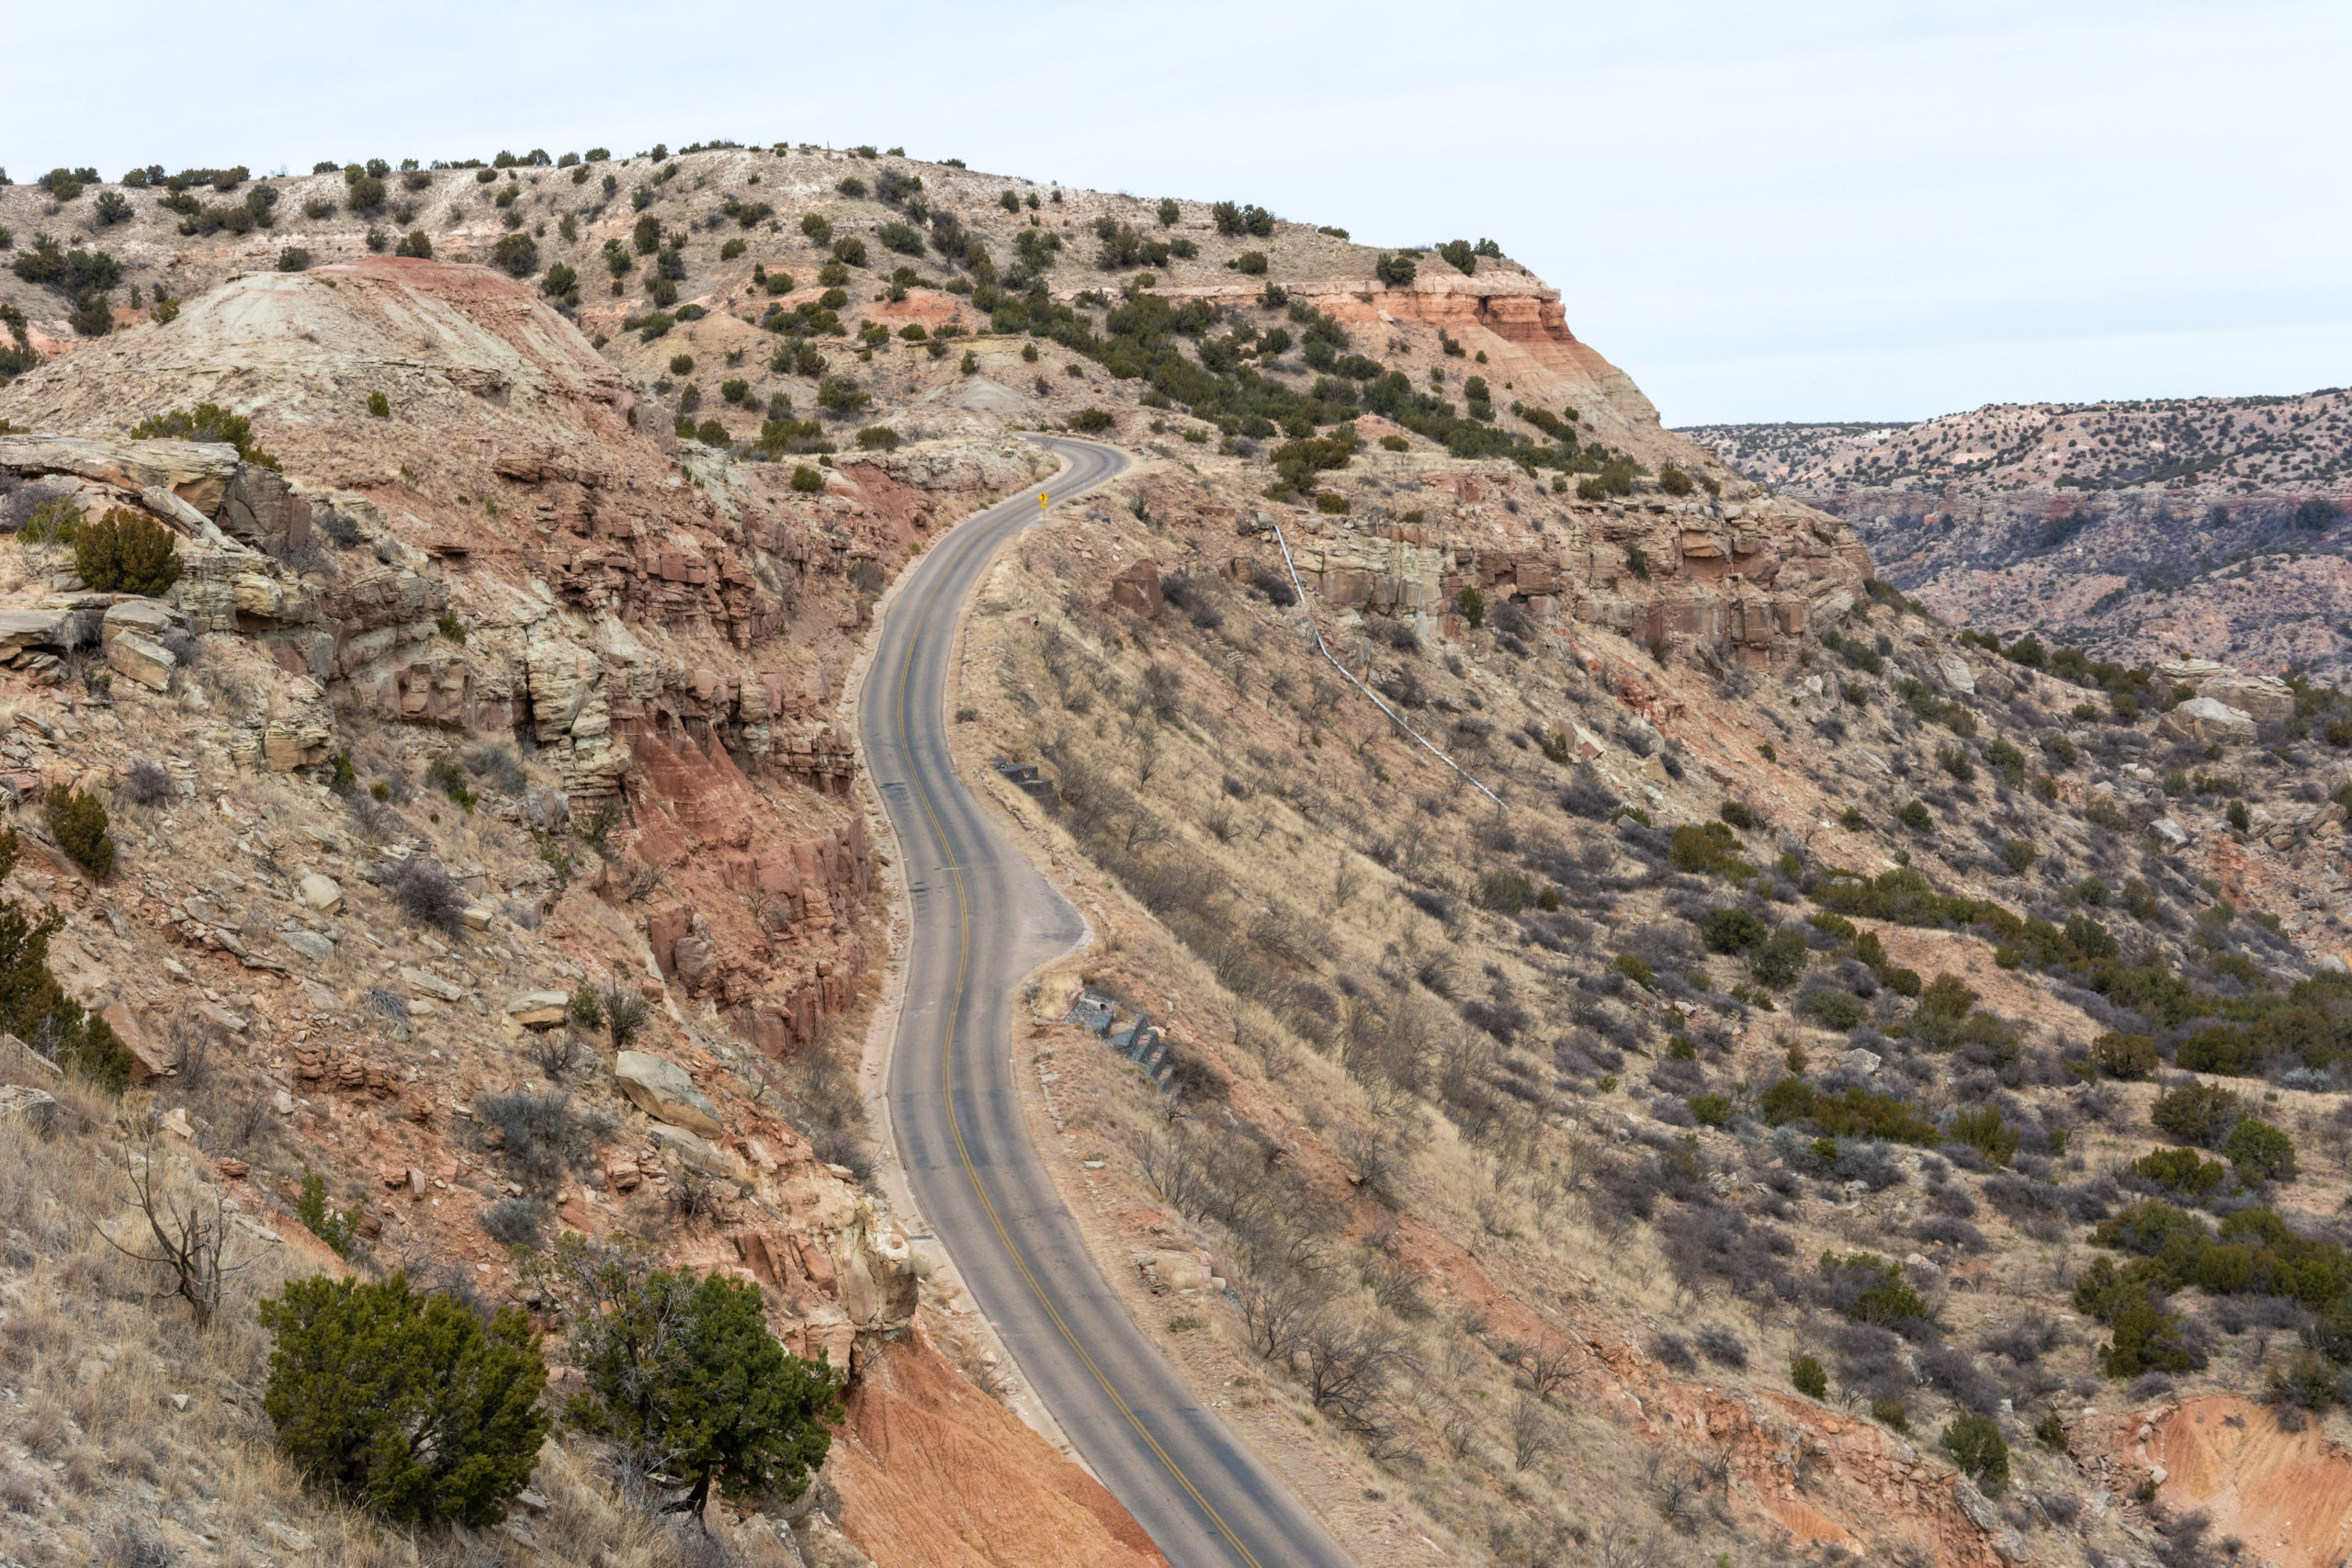 Road in Palo Duro Canyon in Texas.